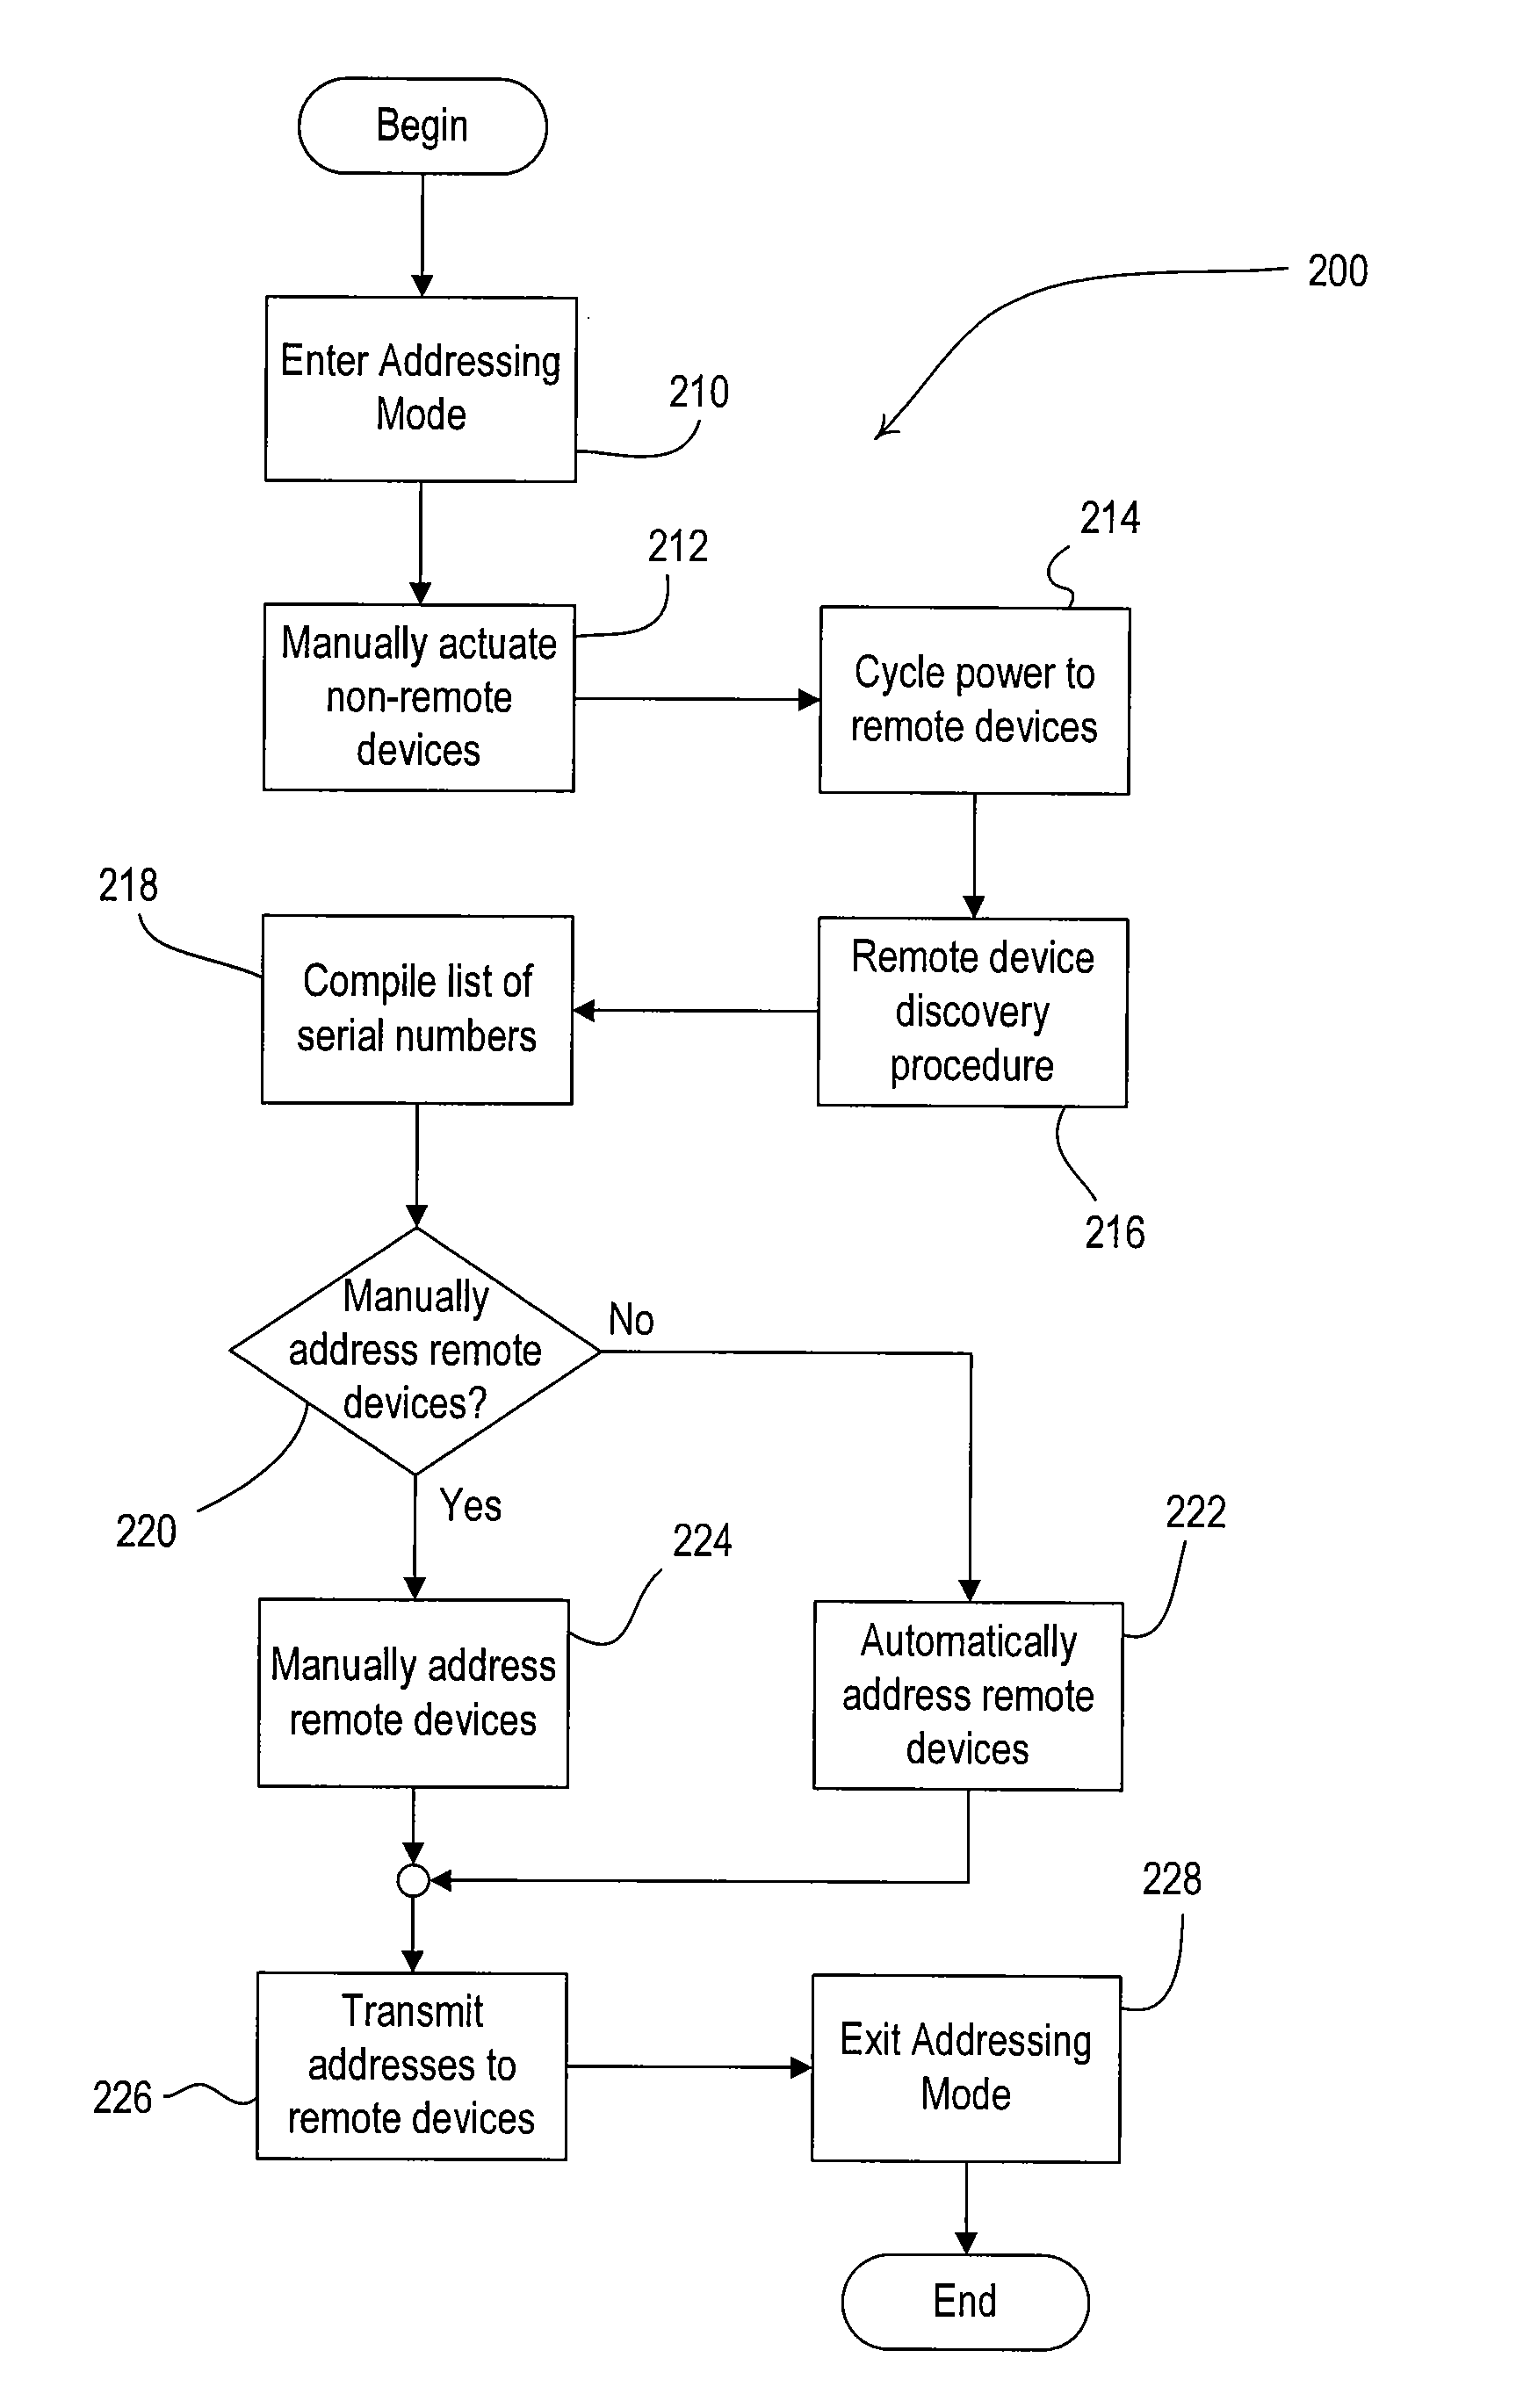 Procedure for addressing remotely-located radio frequency components of a control system